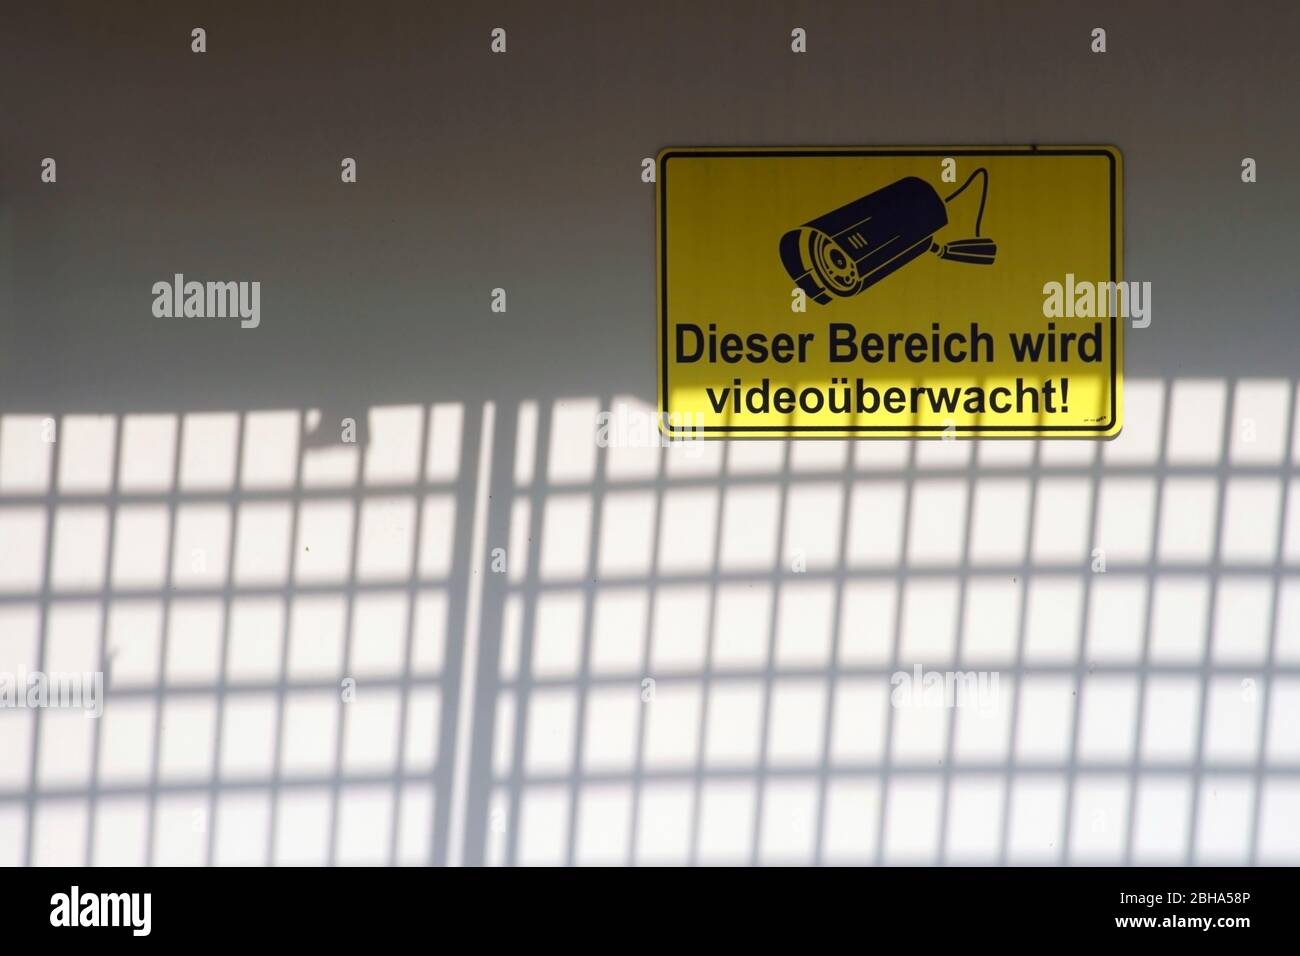 A yellow video security sign behind a fence casting shadows. Stock Photo